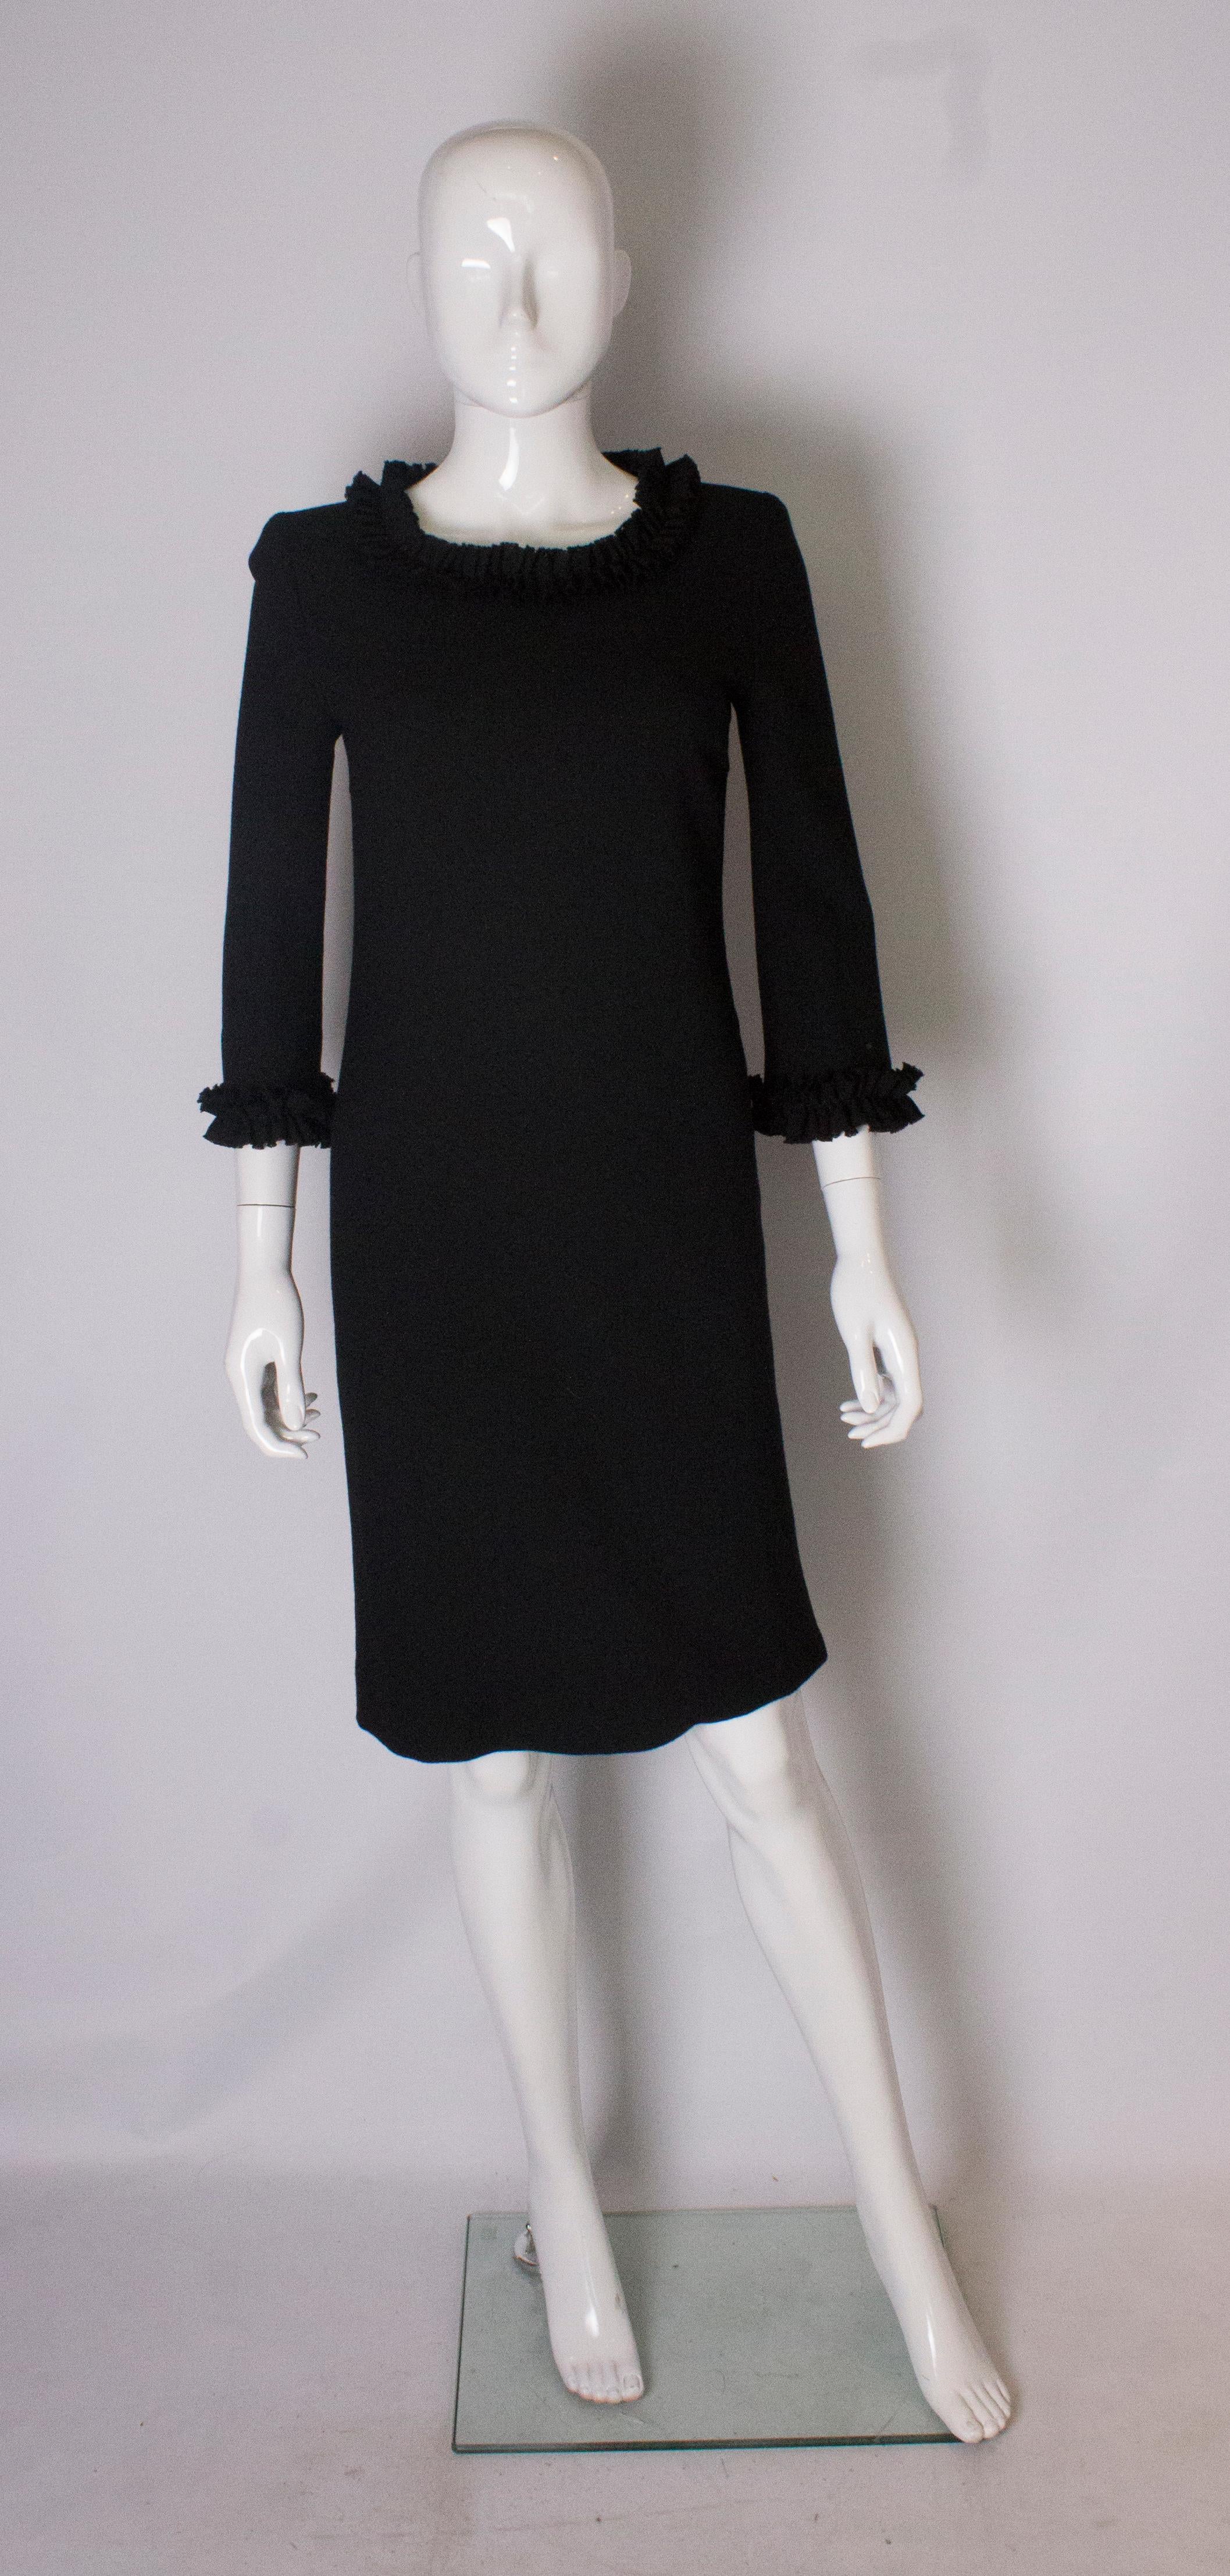 A simply stunning little black dress from Jean Muir ( main line). The dress  has a scoop neckline with frill trim , and elbow length sleaves with frill trim. It is in a black wool crepe and is fully lined with a central back zip.